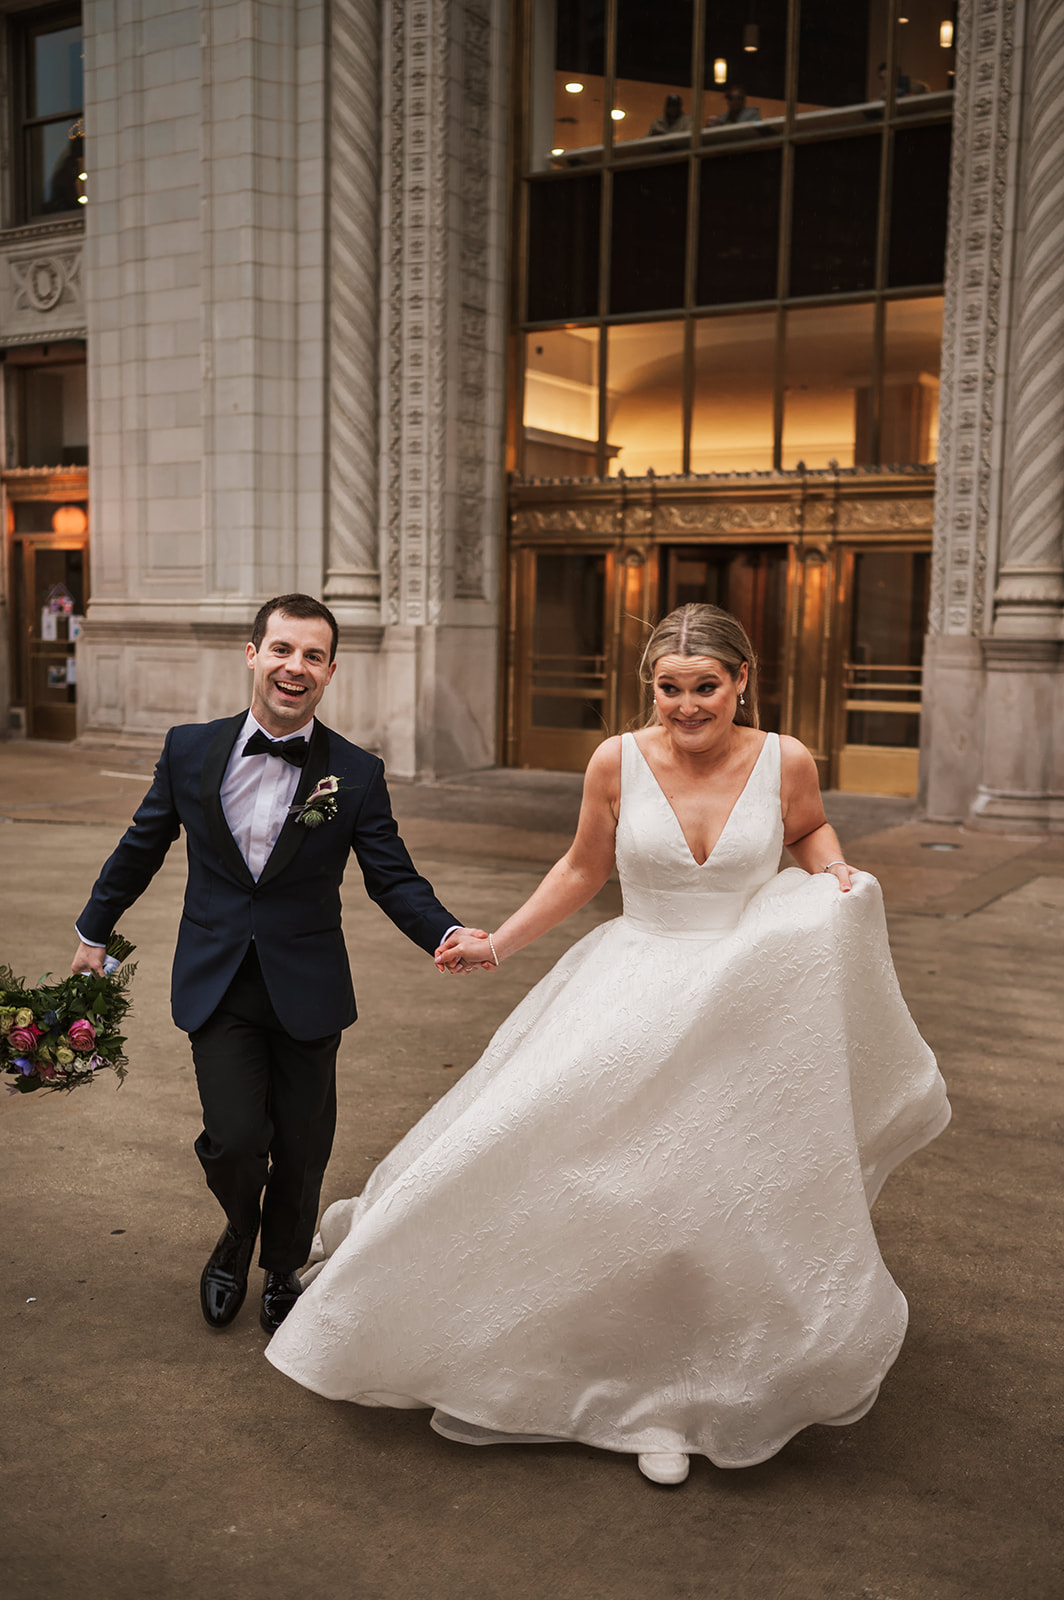 Bride and groom at the end of the winter on riverwalk by the Wrigley building chicago running